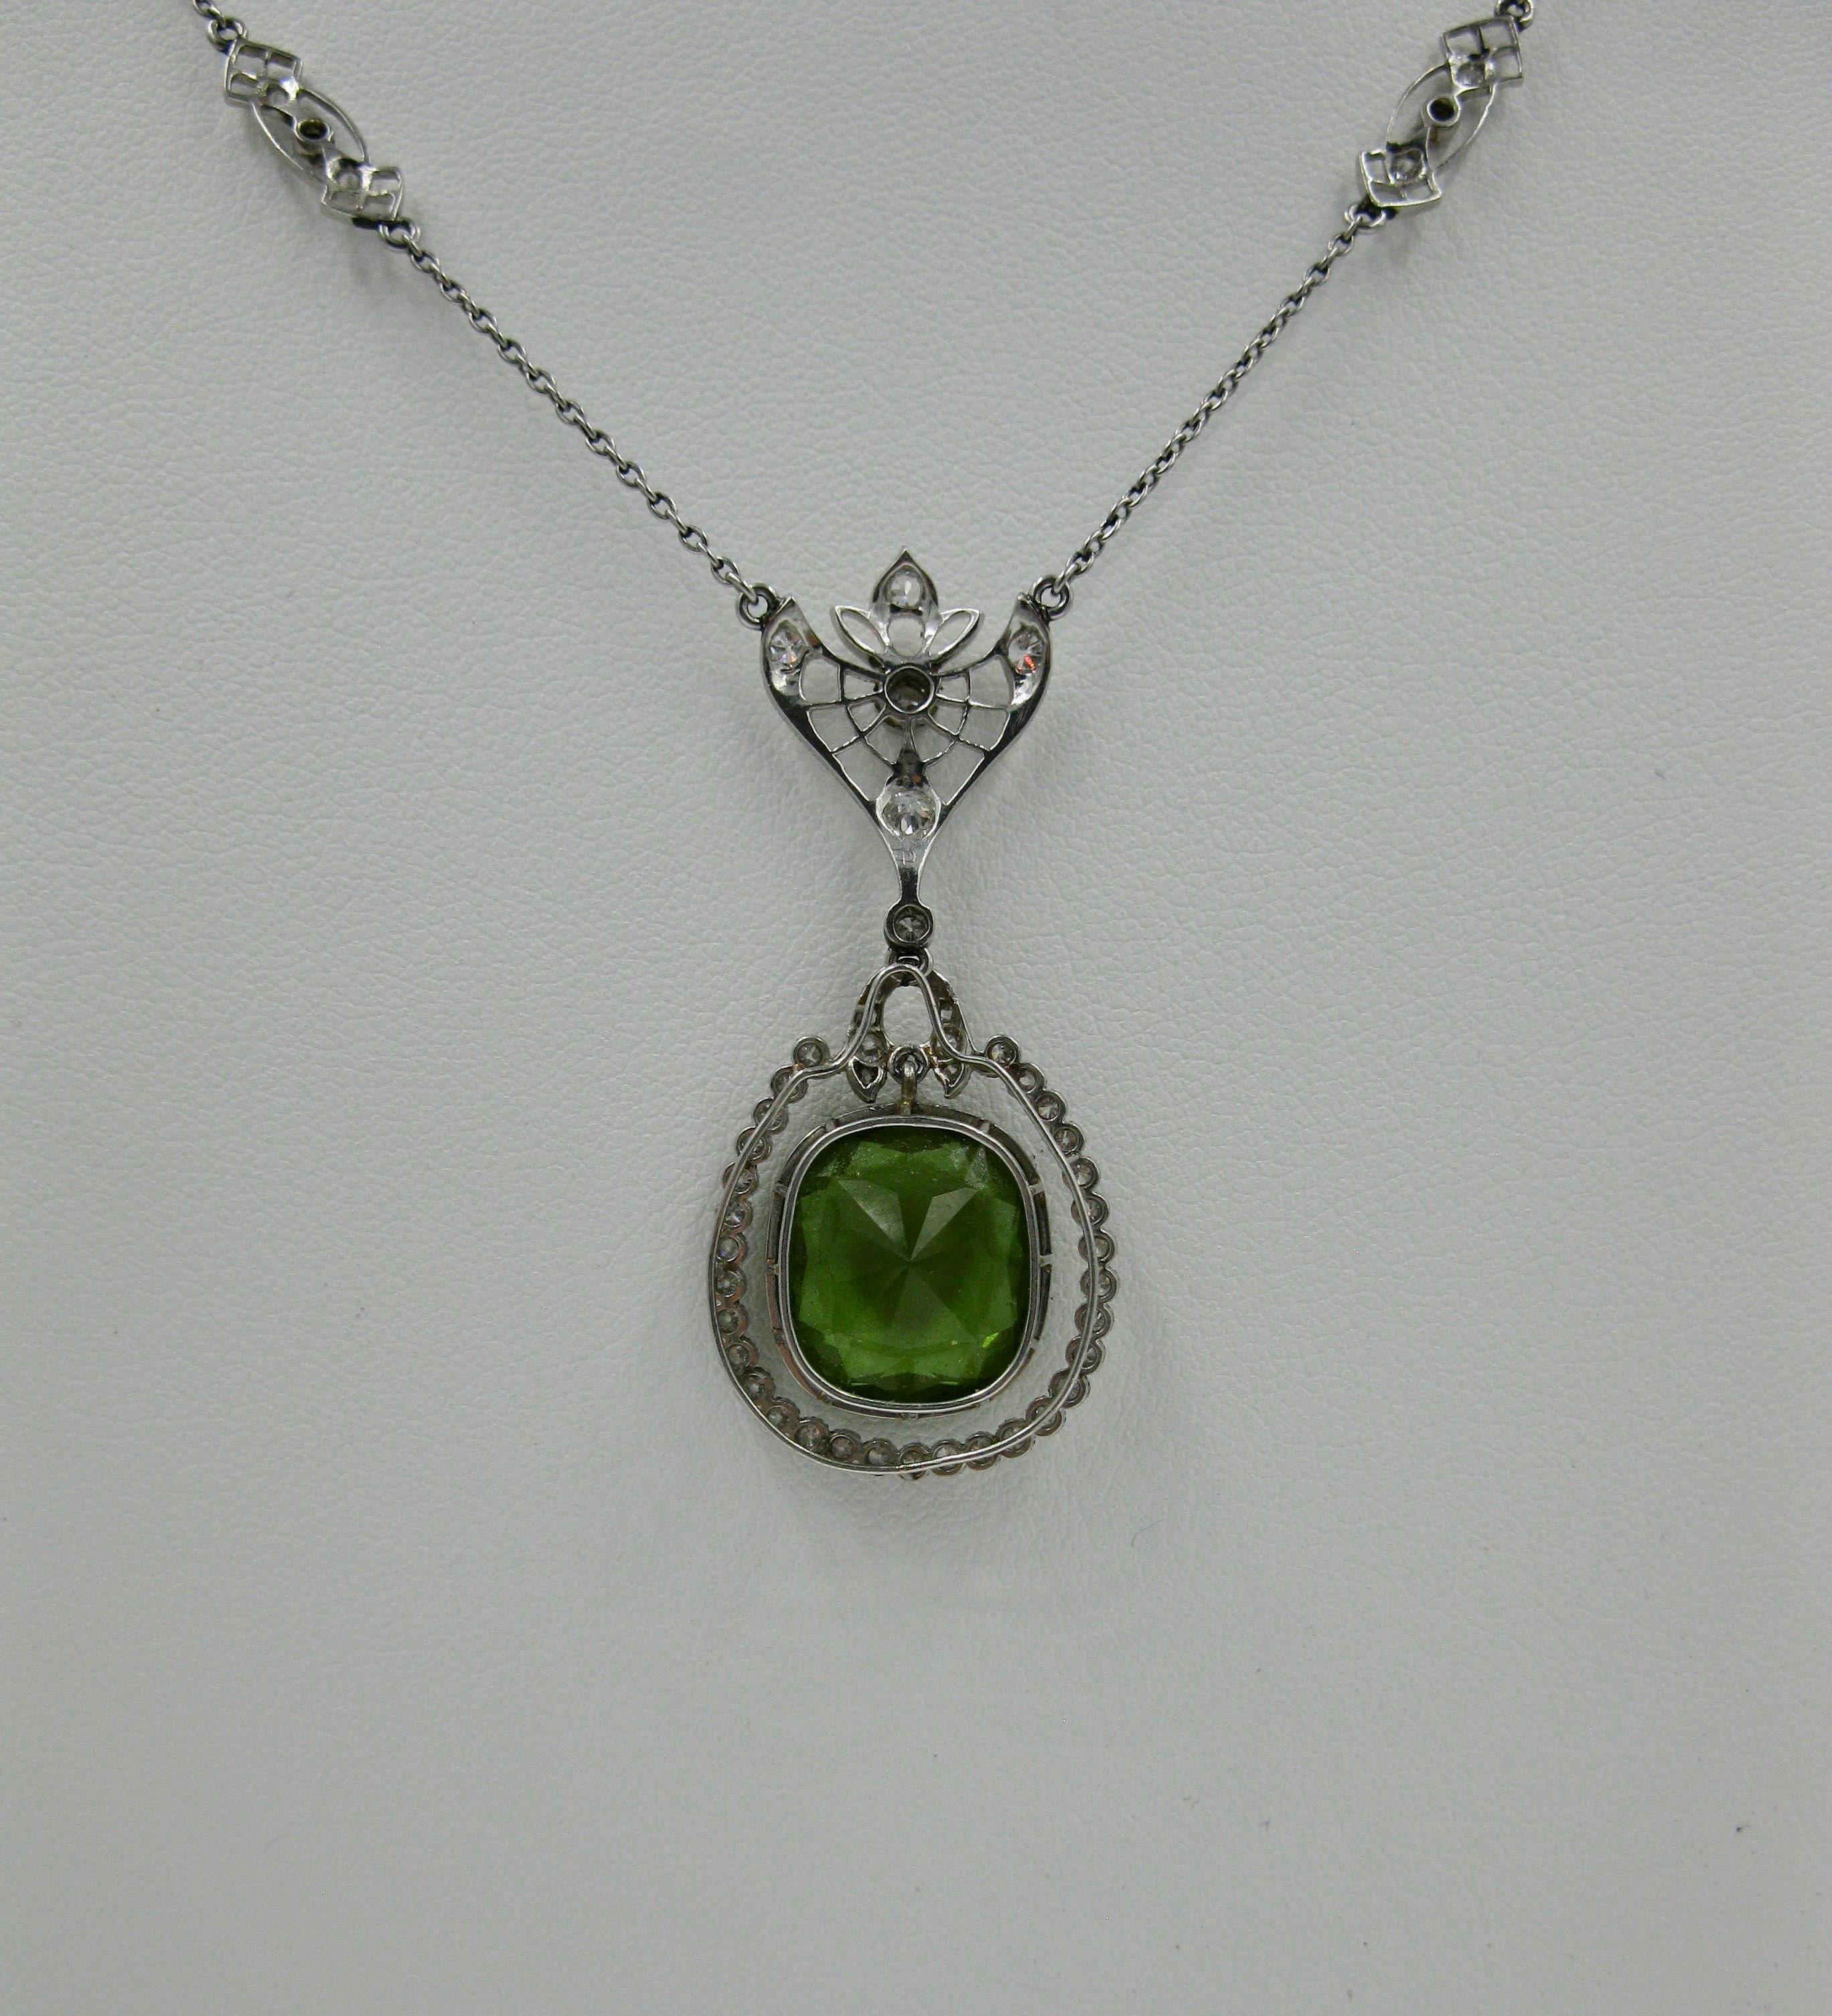 7 Carat Peridot Platinum Diamond Lavaliere Necklace Antique Victorian Edwardian In Excellent Condition For Sale In New York, NY